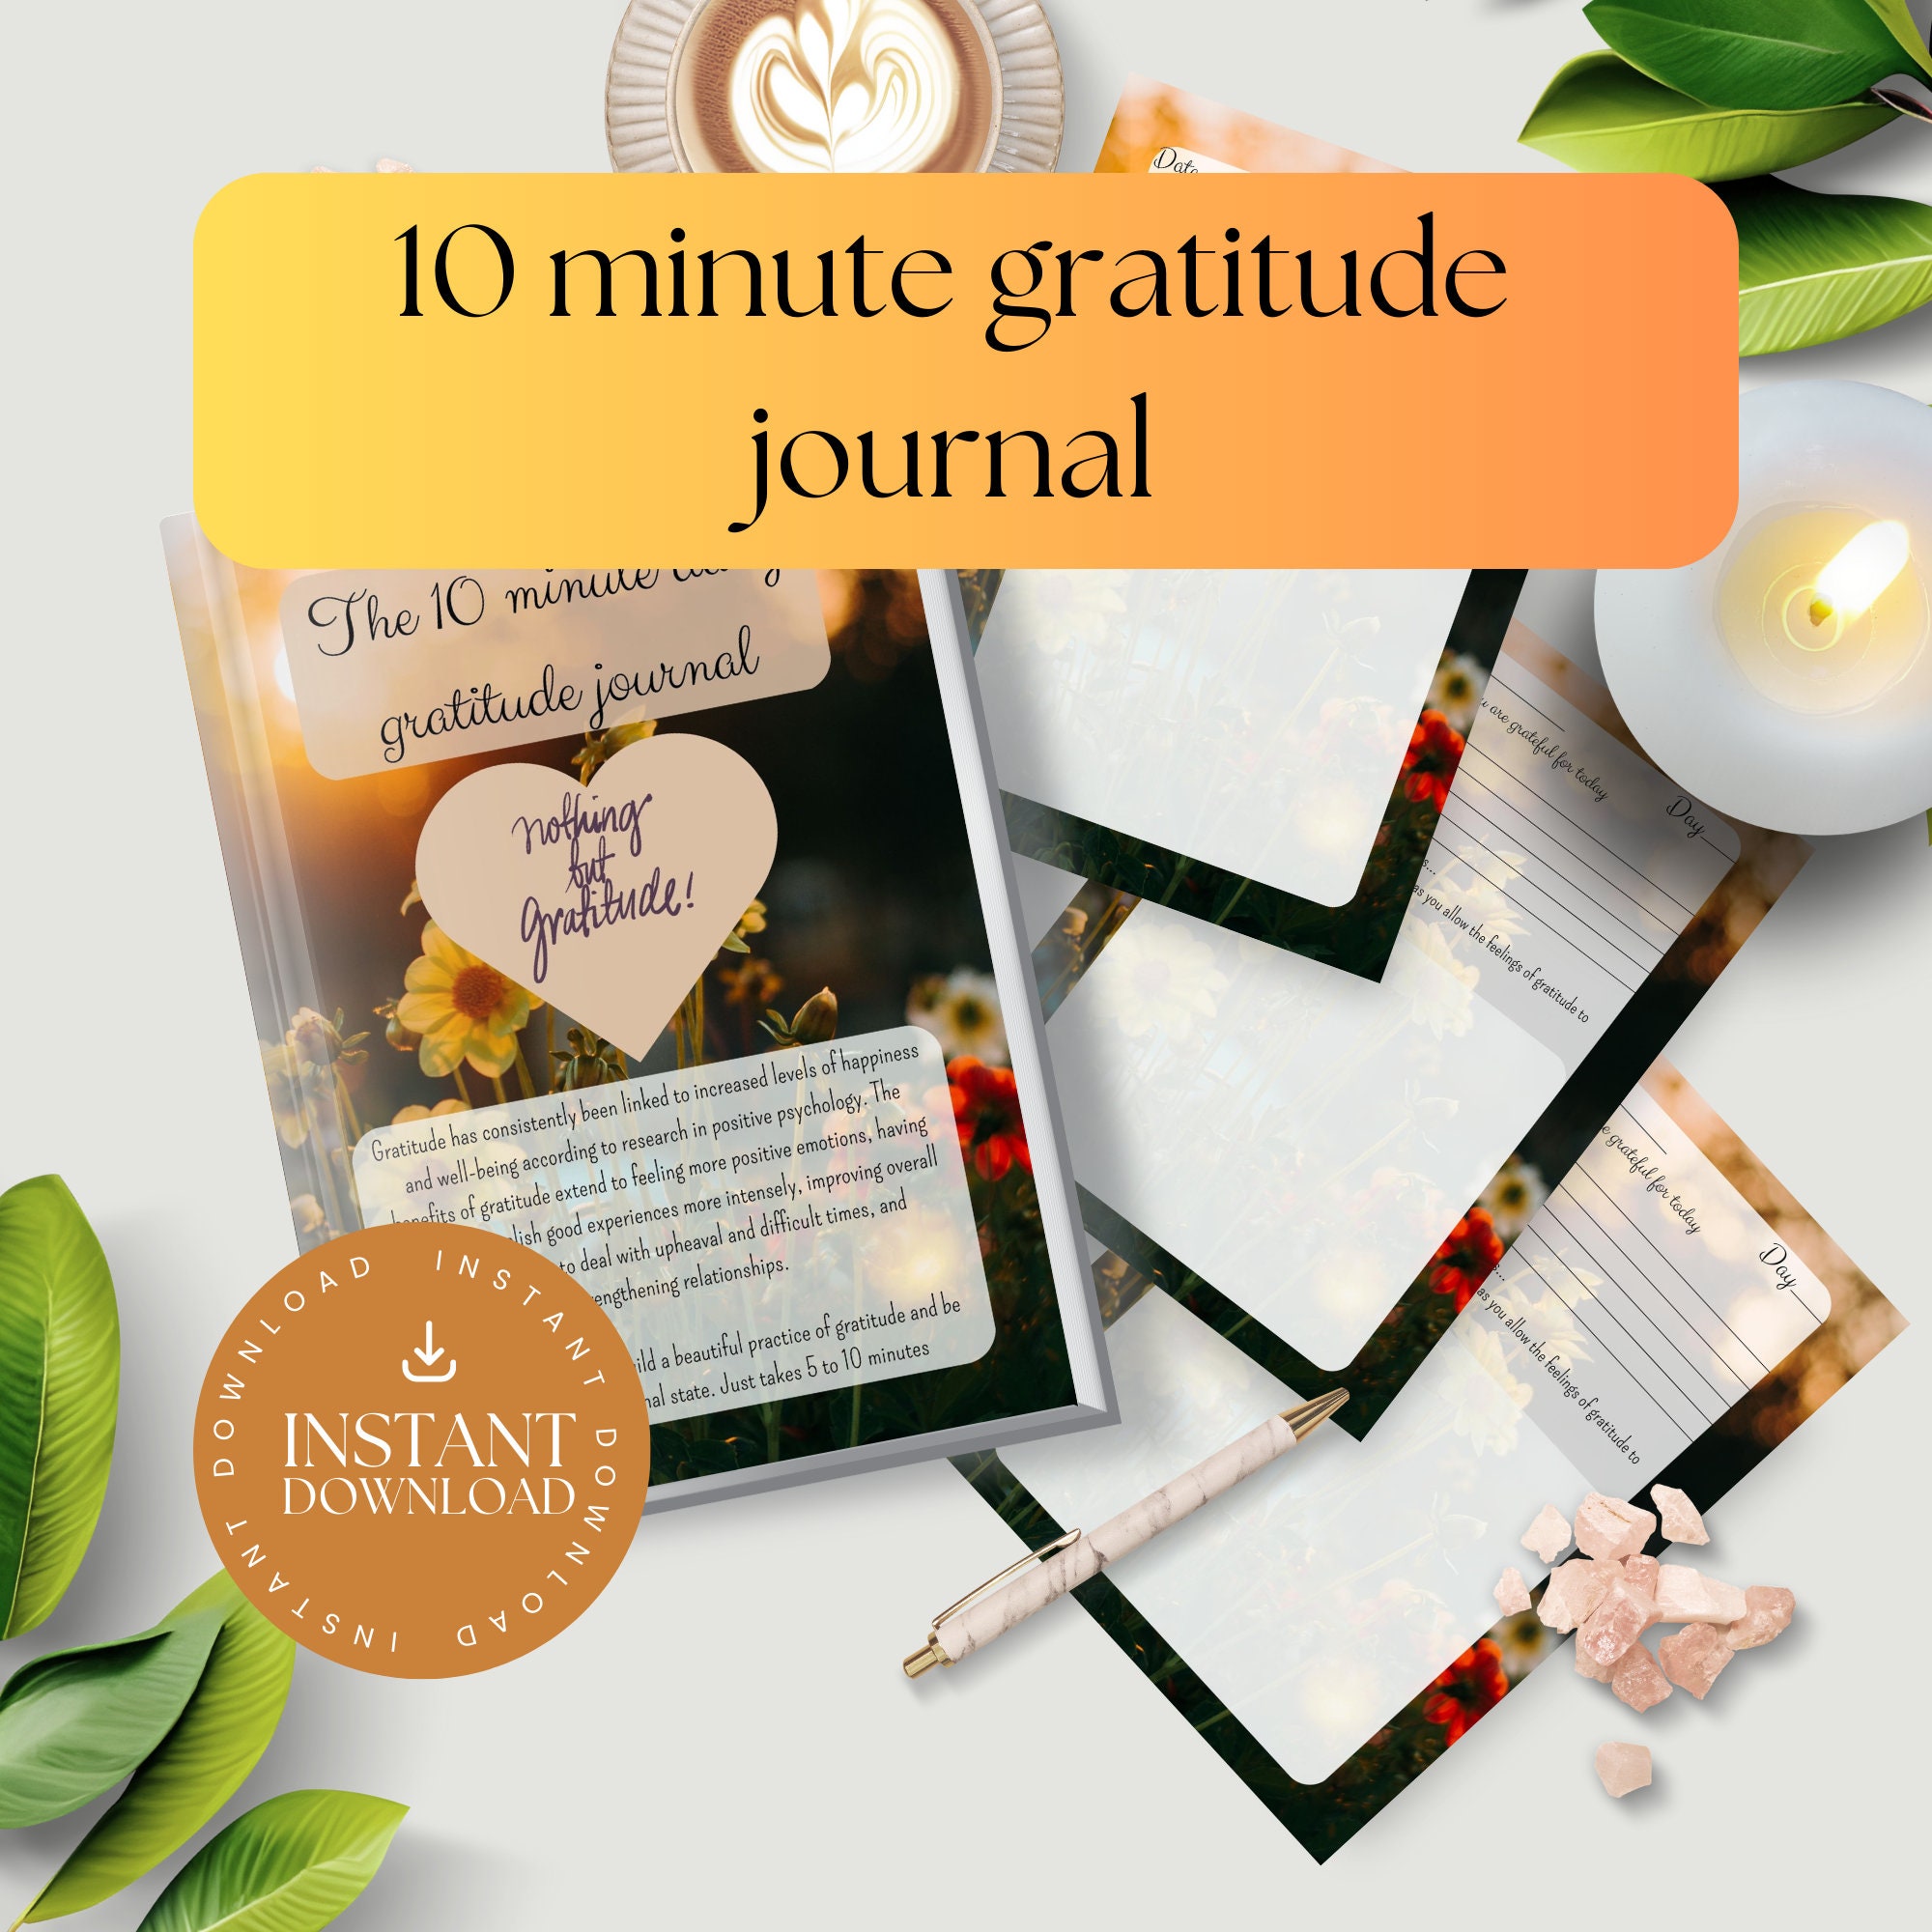 Not Your Average Gratitude Journal: Guided Gratitude + Self Reflection  Resources (Daily Gratitude, Mindfulness and Happiness Journal for Women)  (Hardcover) 